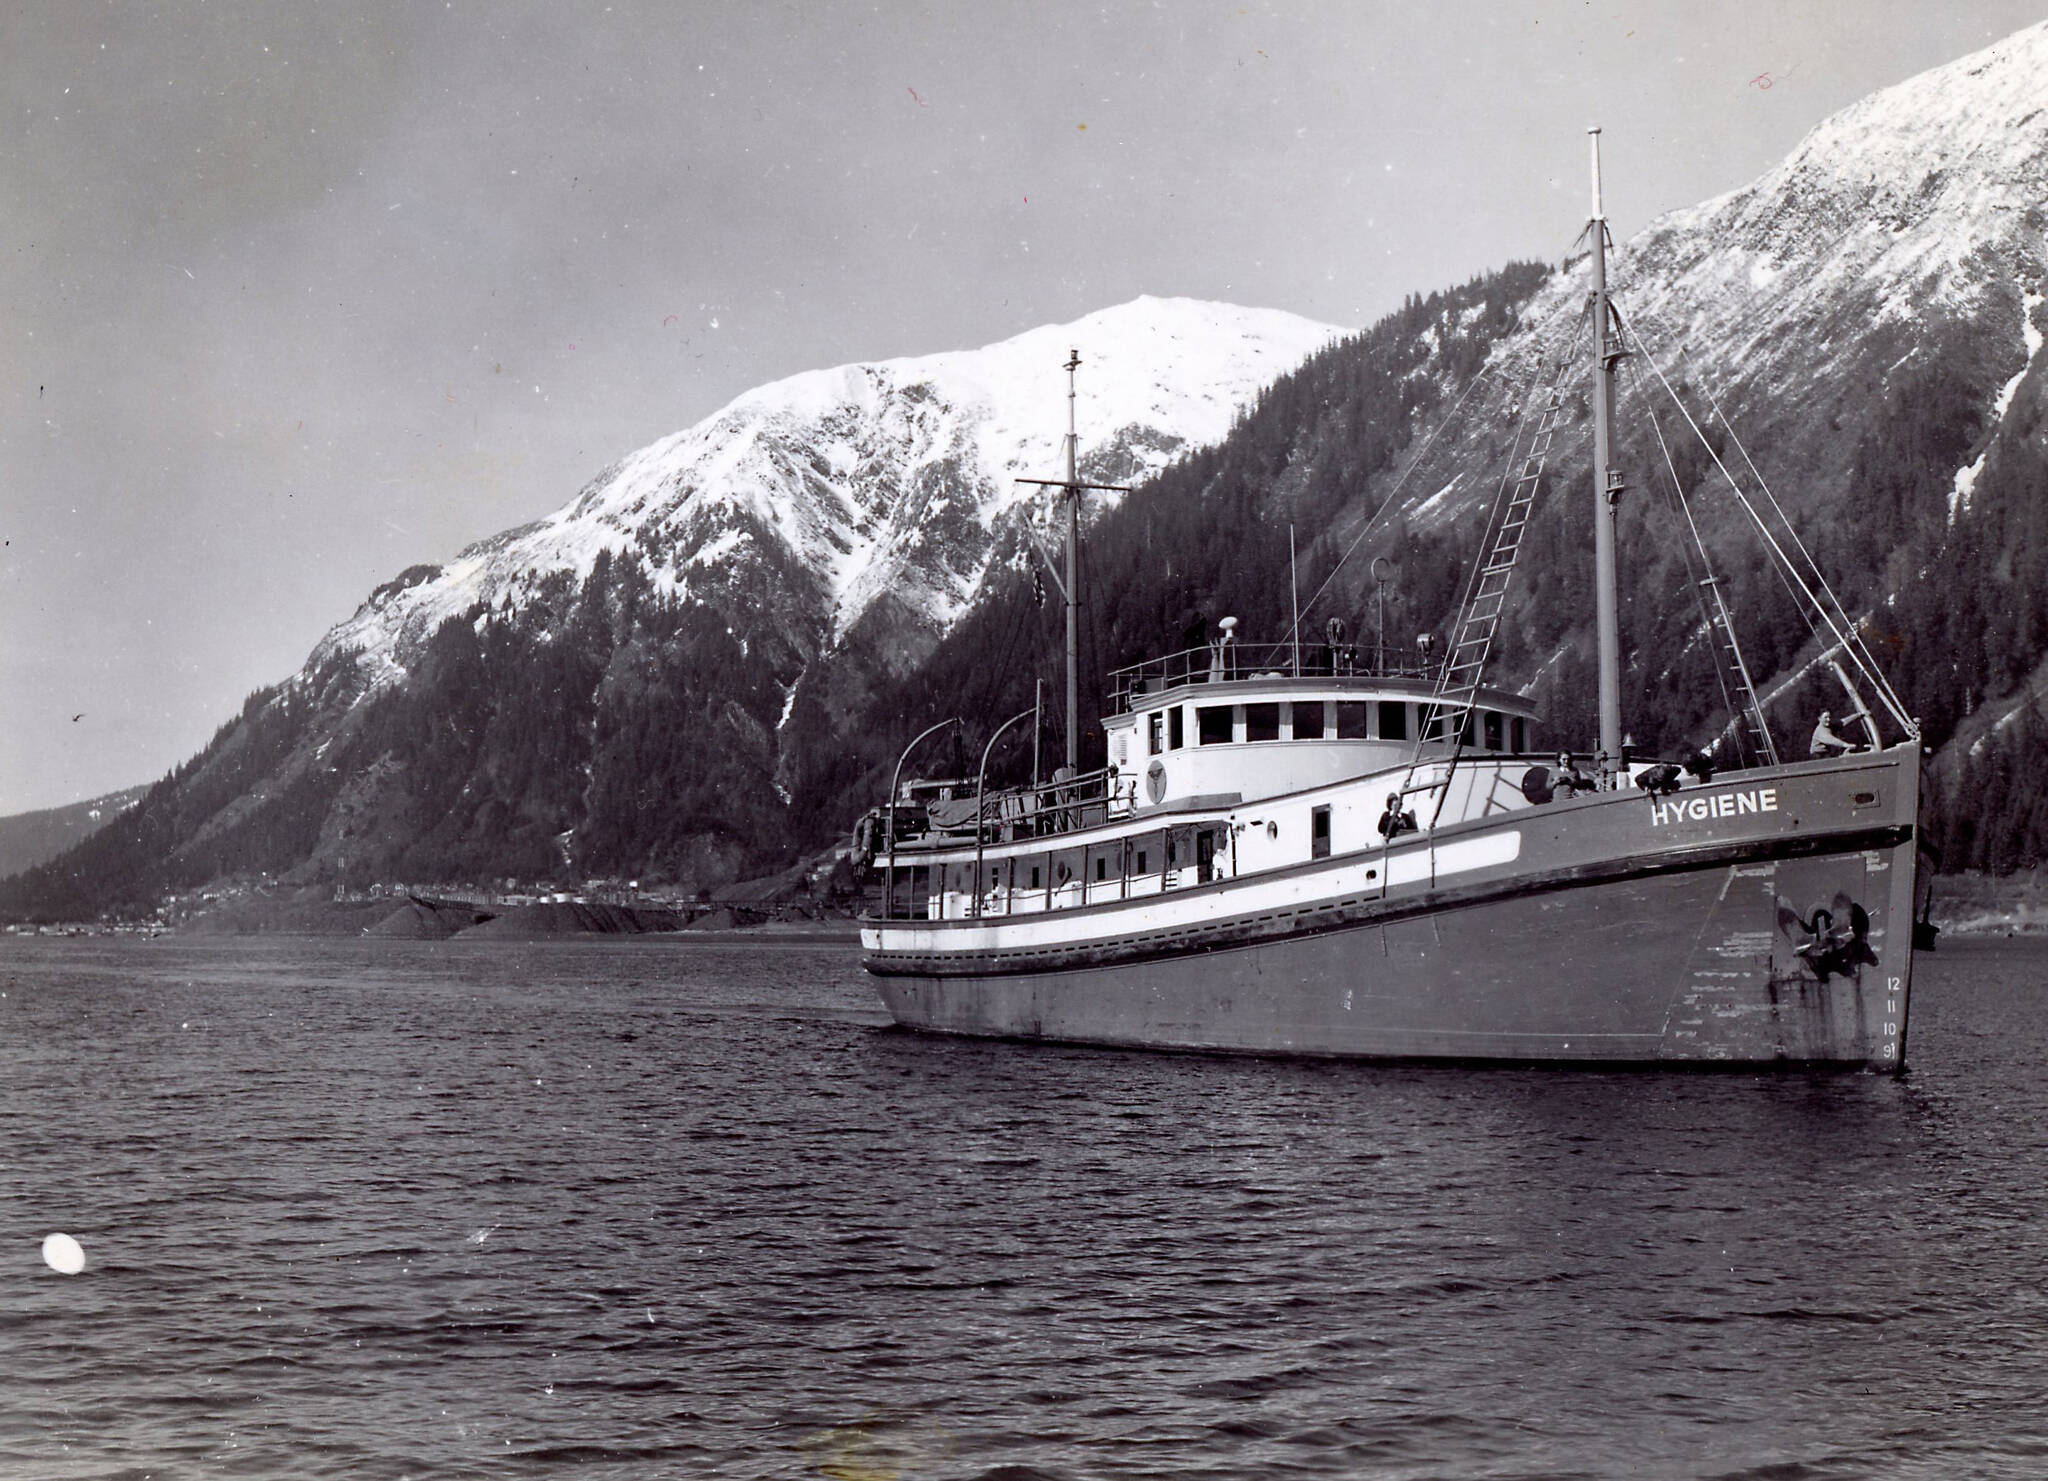 This undated photo of the M.S. Hygiene plying Southeast Alaska waters was taken by J. Malcolm Greany for the Alaska Department of Health. (Photo courtesy of the Fenger Family Collection)